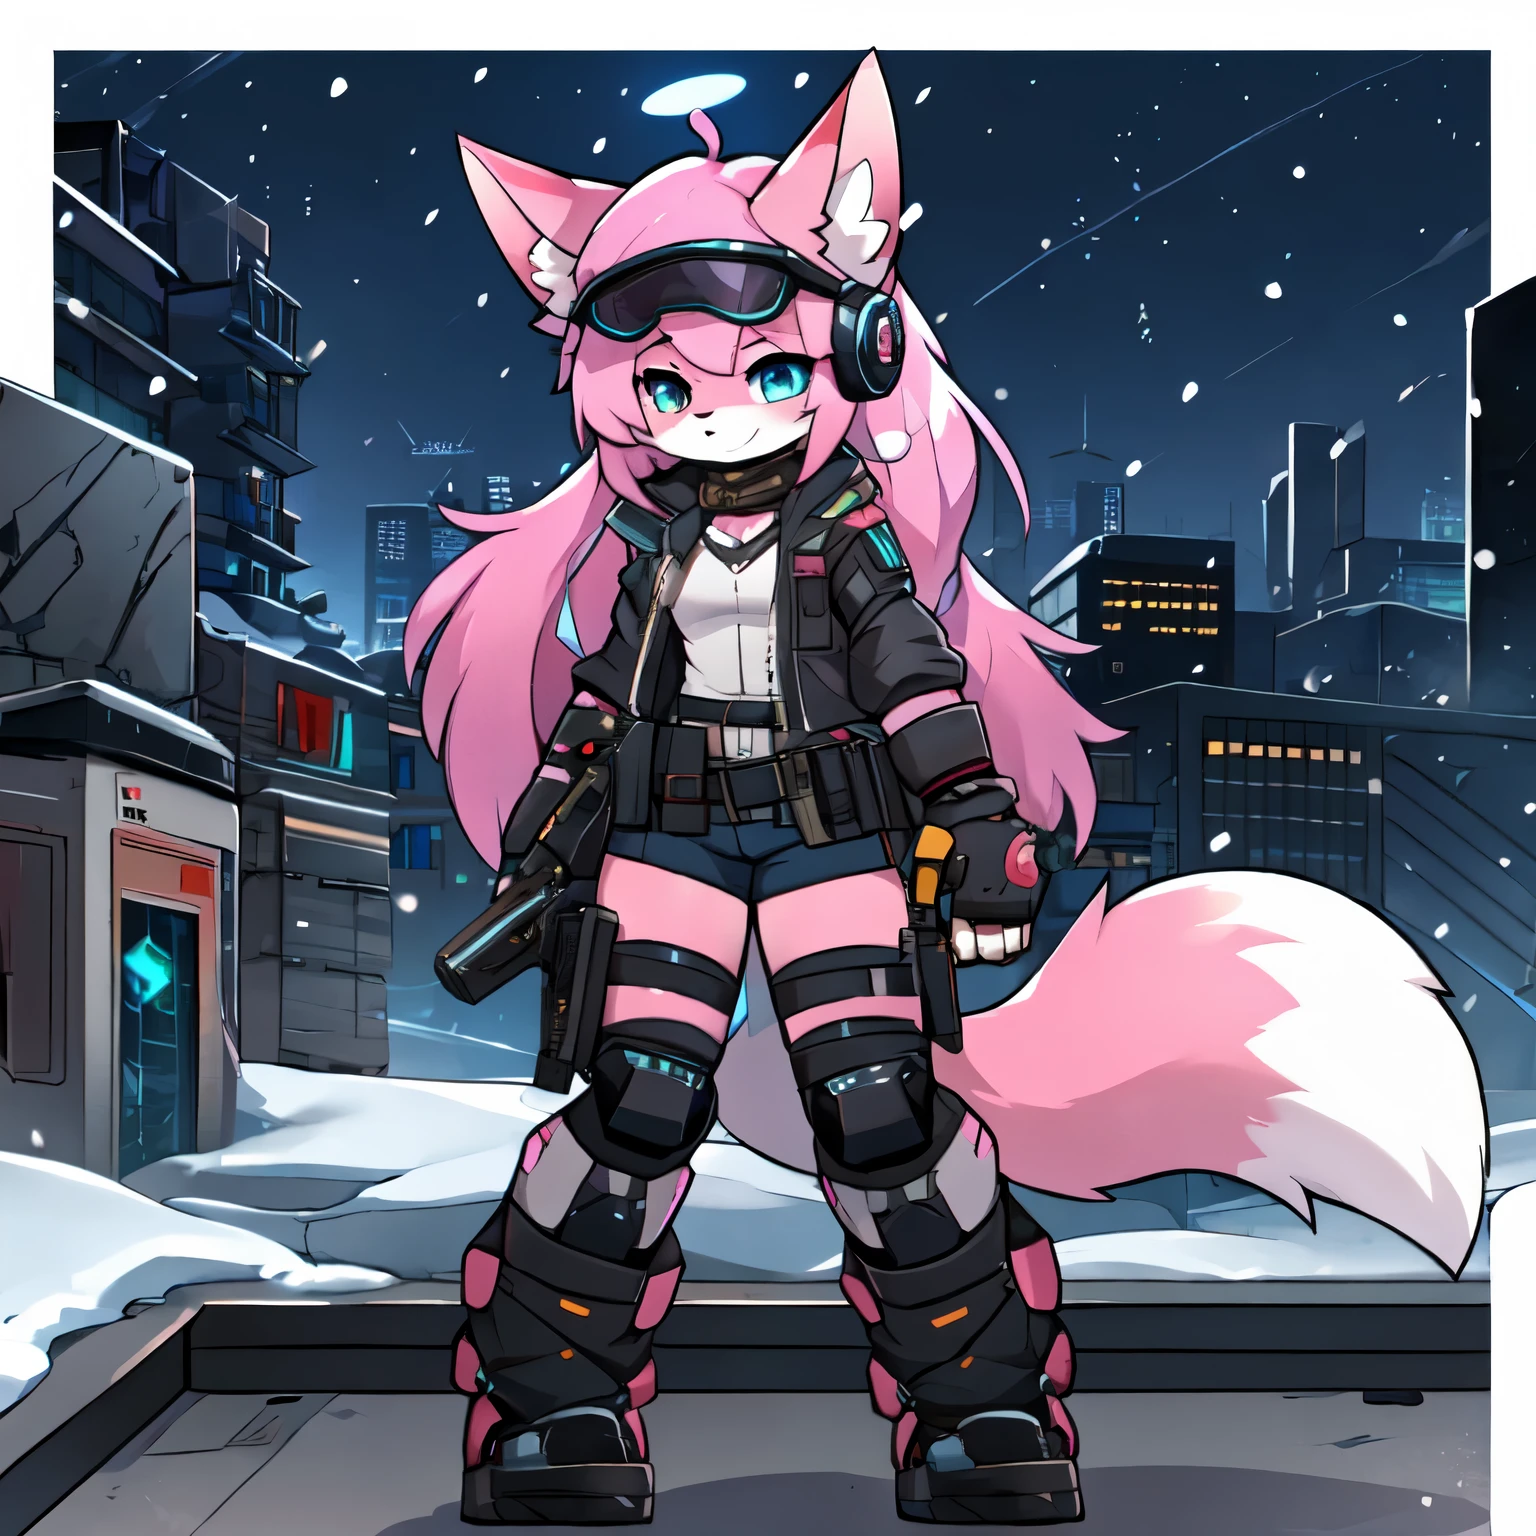 Kawaii, pink striped Fluffy Fox, Pink hair, left eye is red, right eye is blue, heterochromia, Solo, body fur, on the night deserted city with ruins and snowing followed Cold weather, synthetic tissue skin, cybernetic prosthetics, cybernetical servo prosthetic legs, digital headphone with HUD, mech suit, mech body parts, cybernetical prosthetic arms, over-sized long blouse with ribbons, thigh-high-socks, shorts, Grey long Sleeve loose Military hood jacket, tactical gun holsters in thigh, Mechanical boots, only one fluffy tail, metallic knee pads, tactical belted loose Arm Sleeves, Digital Screened gloves, chest rigs, tactical belts, Blue archive halo, Submachine Gun holded on left hand, bulletproof goggles, respirators on the neck, baseball hat,